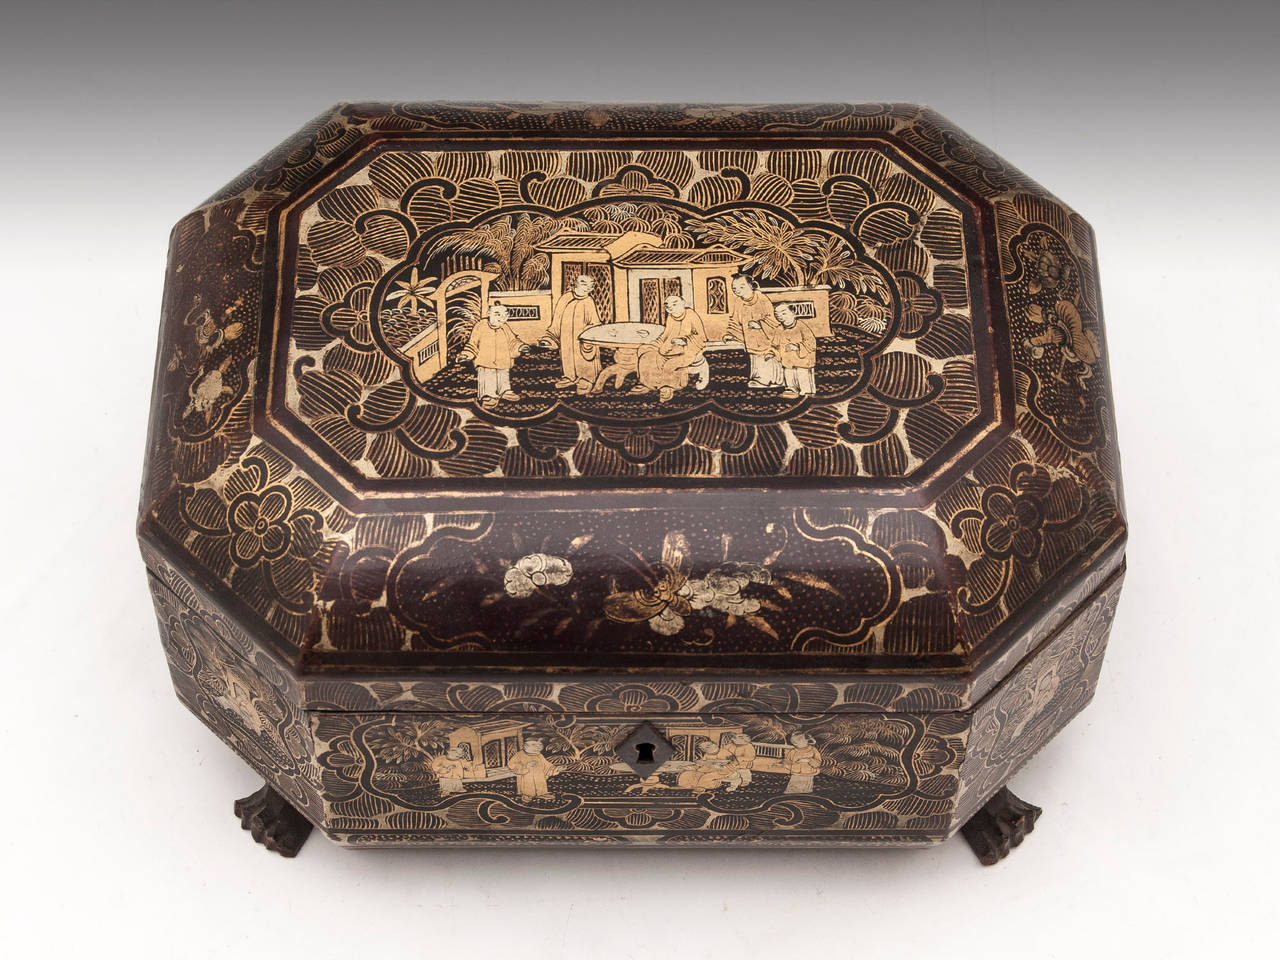 Chinese lacquer Tea Caddy standing on four carved dragon feet with beautiful Chinoiserie panels. 

The interior features two removable paktong caddies with bone handle lids. 

Shipping Cost: 
United Kingdom £25 
Europe £65 
International £85